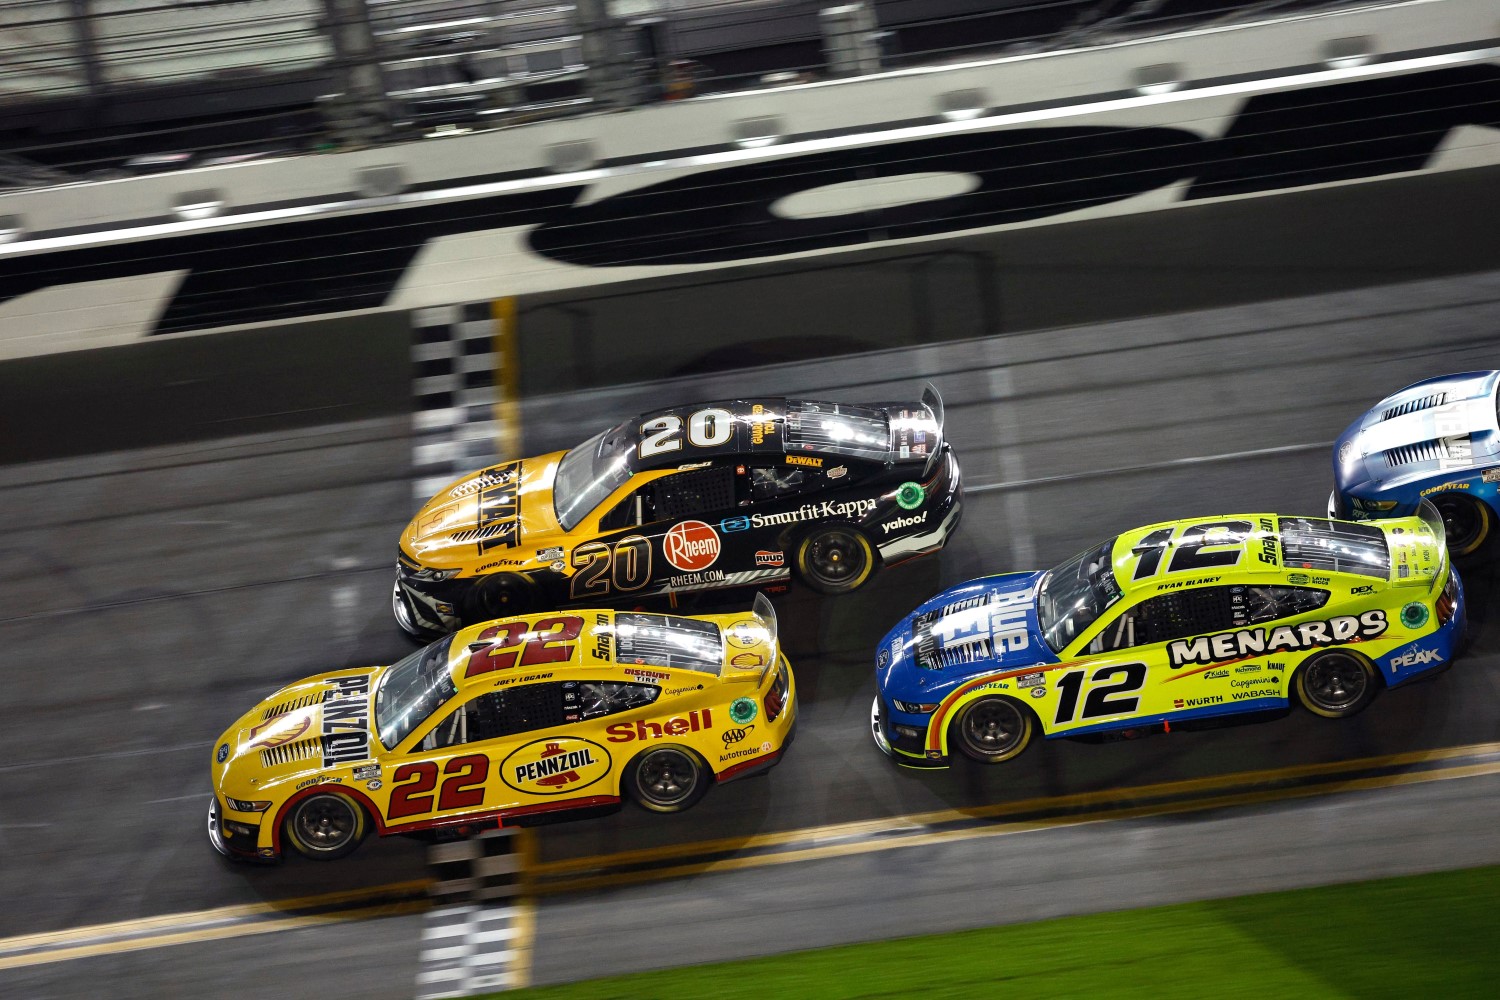 oey Logano, driver of the #22 Shell Pennzoil Ford, crosses the finish line ahead o Christopher Bell, driver of the #20 DeWalt/Rheem Toyota, and Ryan Blaney, driver of the #12 Menards/Blue DEF/PEAK Ford, to win the NASCAR Cup Series Bluegreen Vacations Duel #1 at Daytona International Speedway on February 16, 2023 in Daytona Beach, Florida. (Photo by Jared C. Tilton/Getty Images)